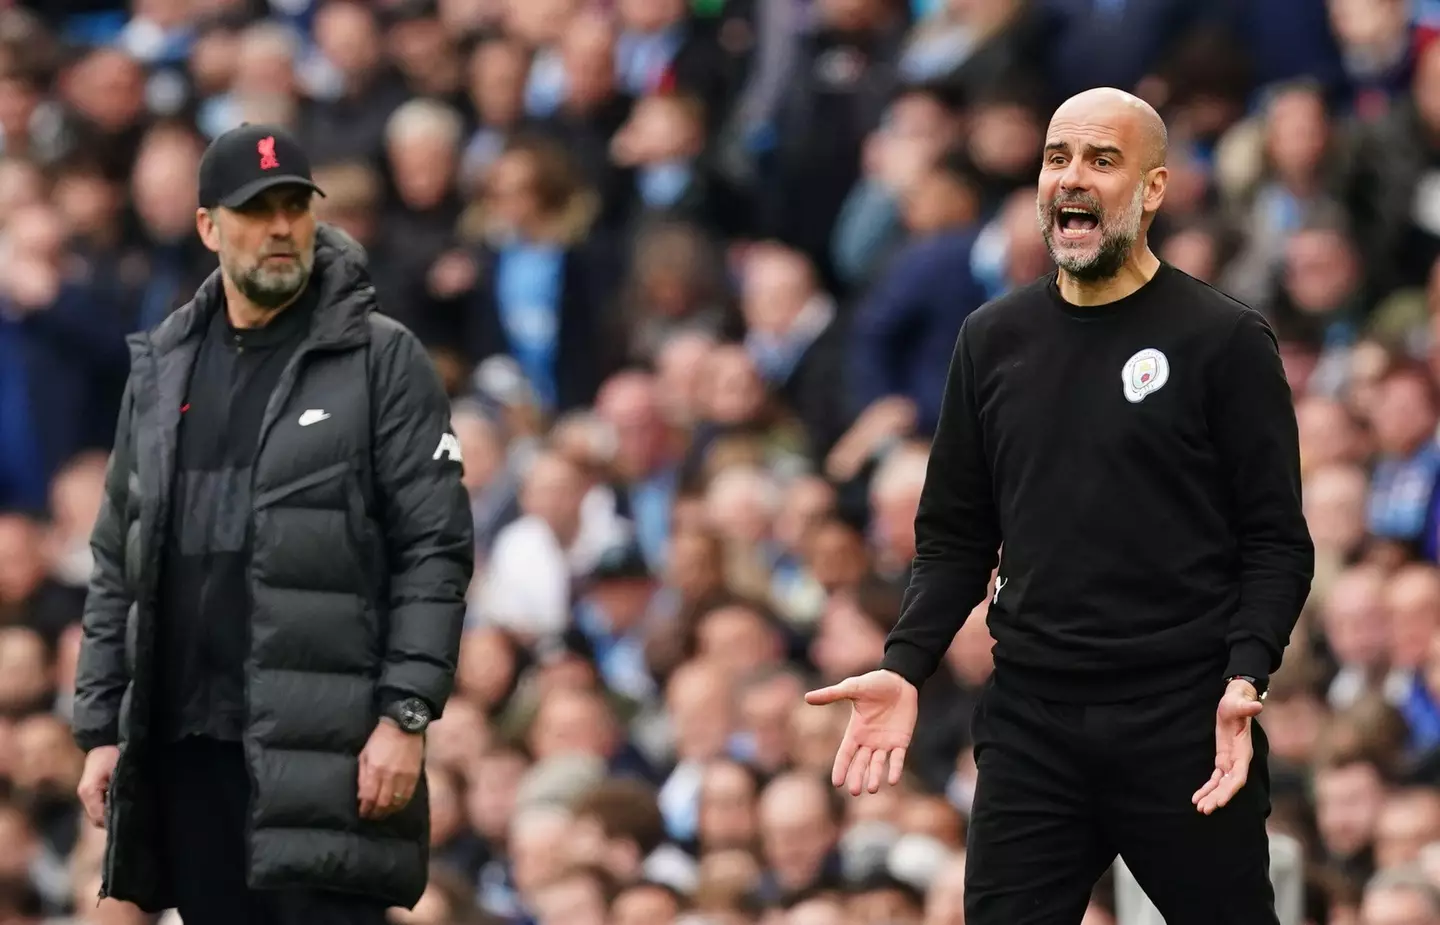 Pep Guardiola claims Liverpool fans threw coins at him during the match (Image: Alamy)